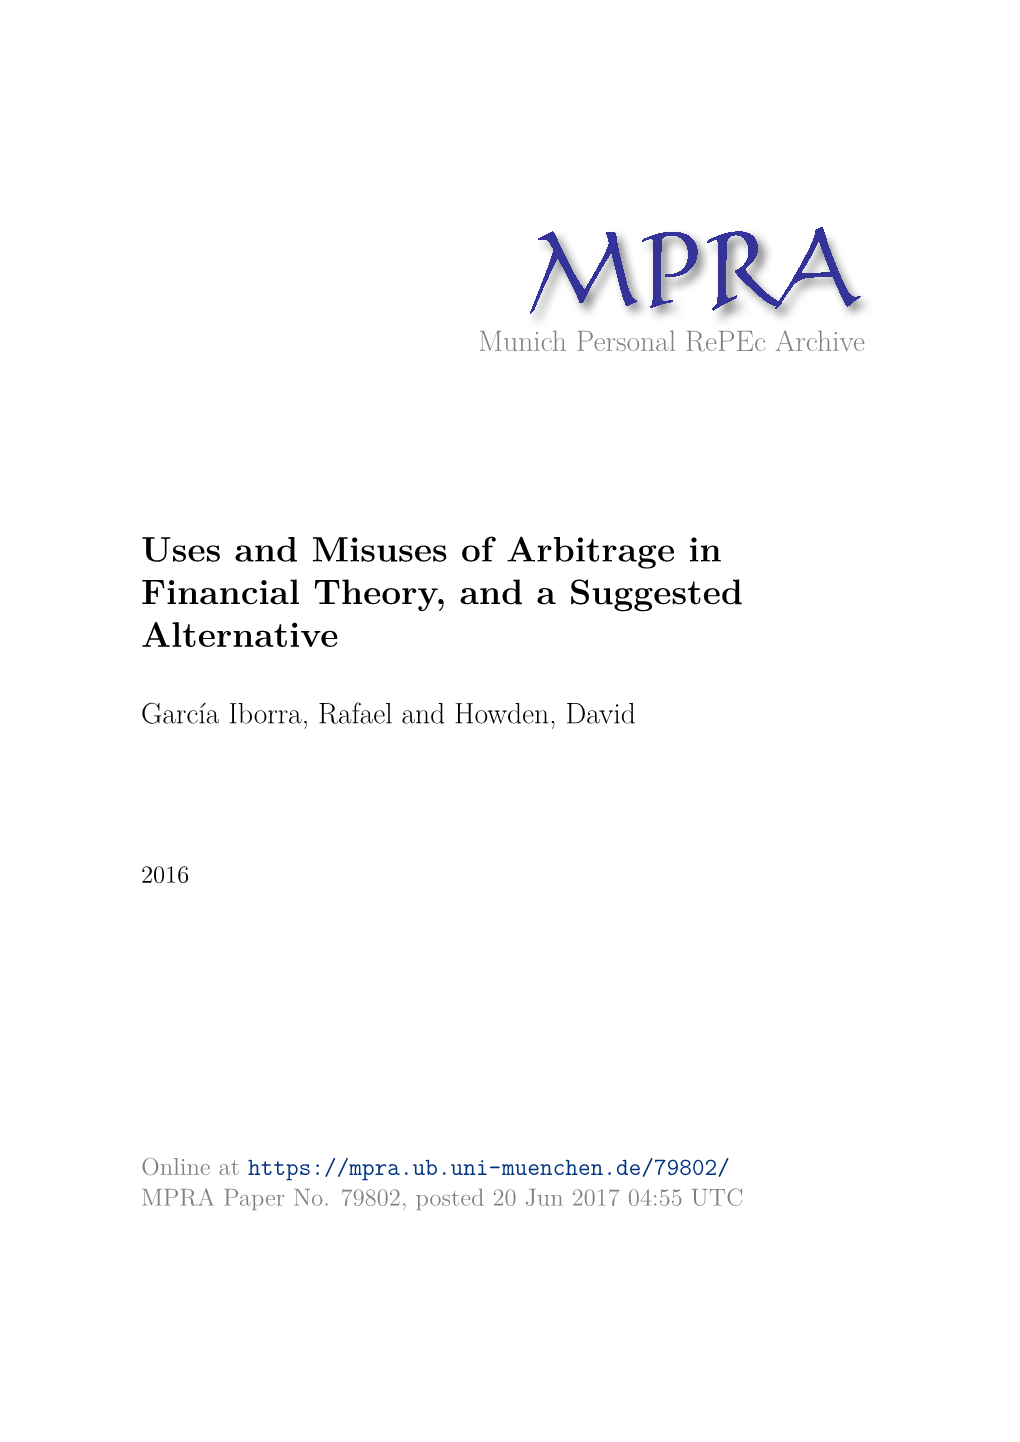 Uses and Misuses of Arbitrage in Financial Theory, and a Suggested Alternative